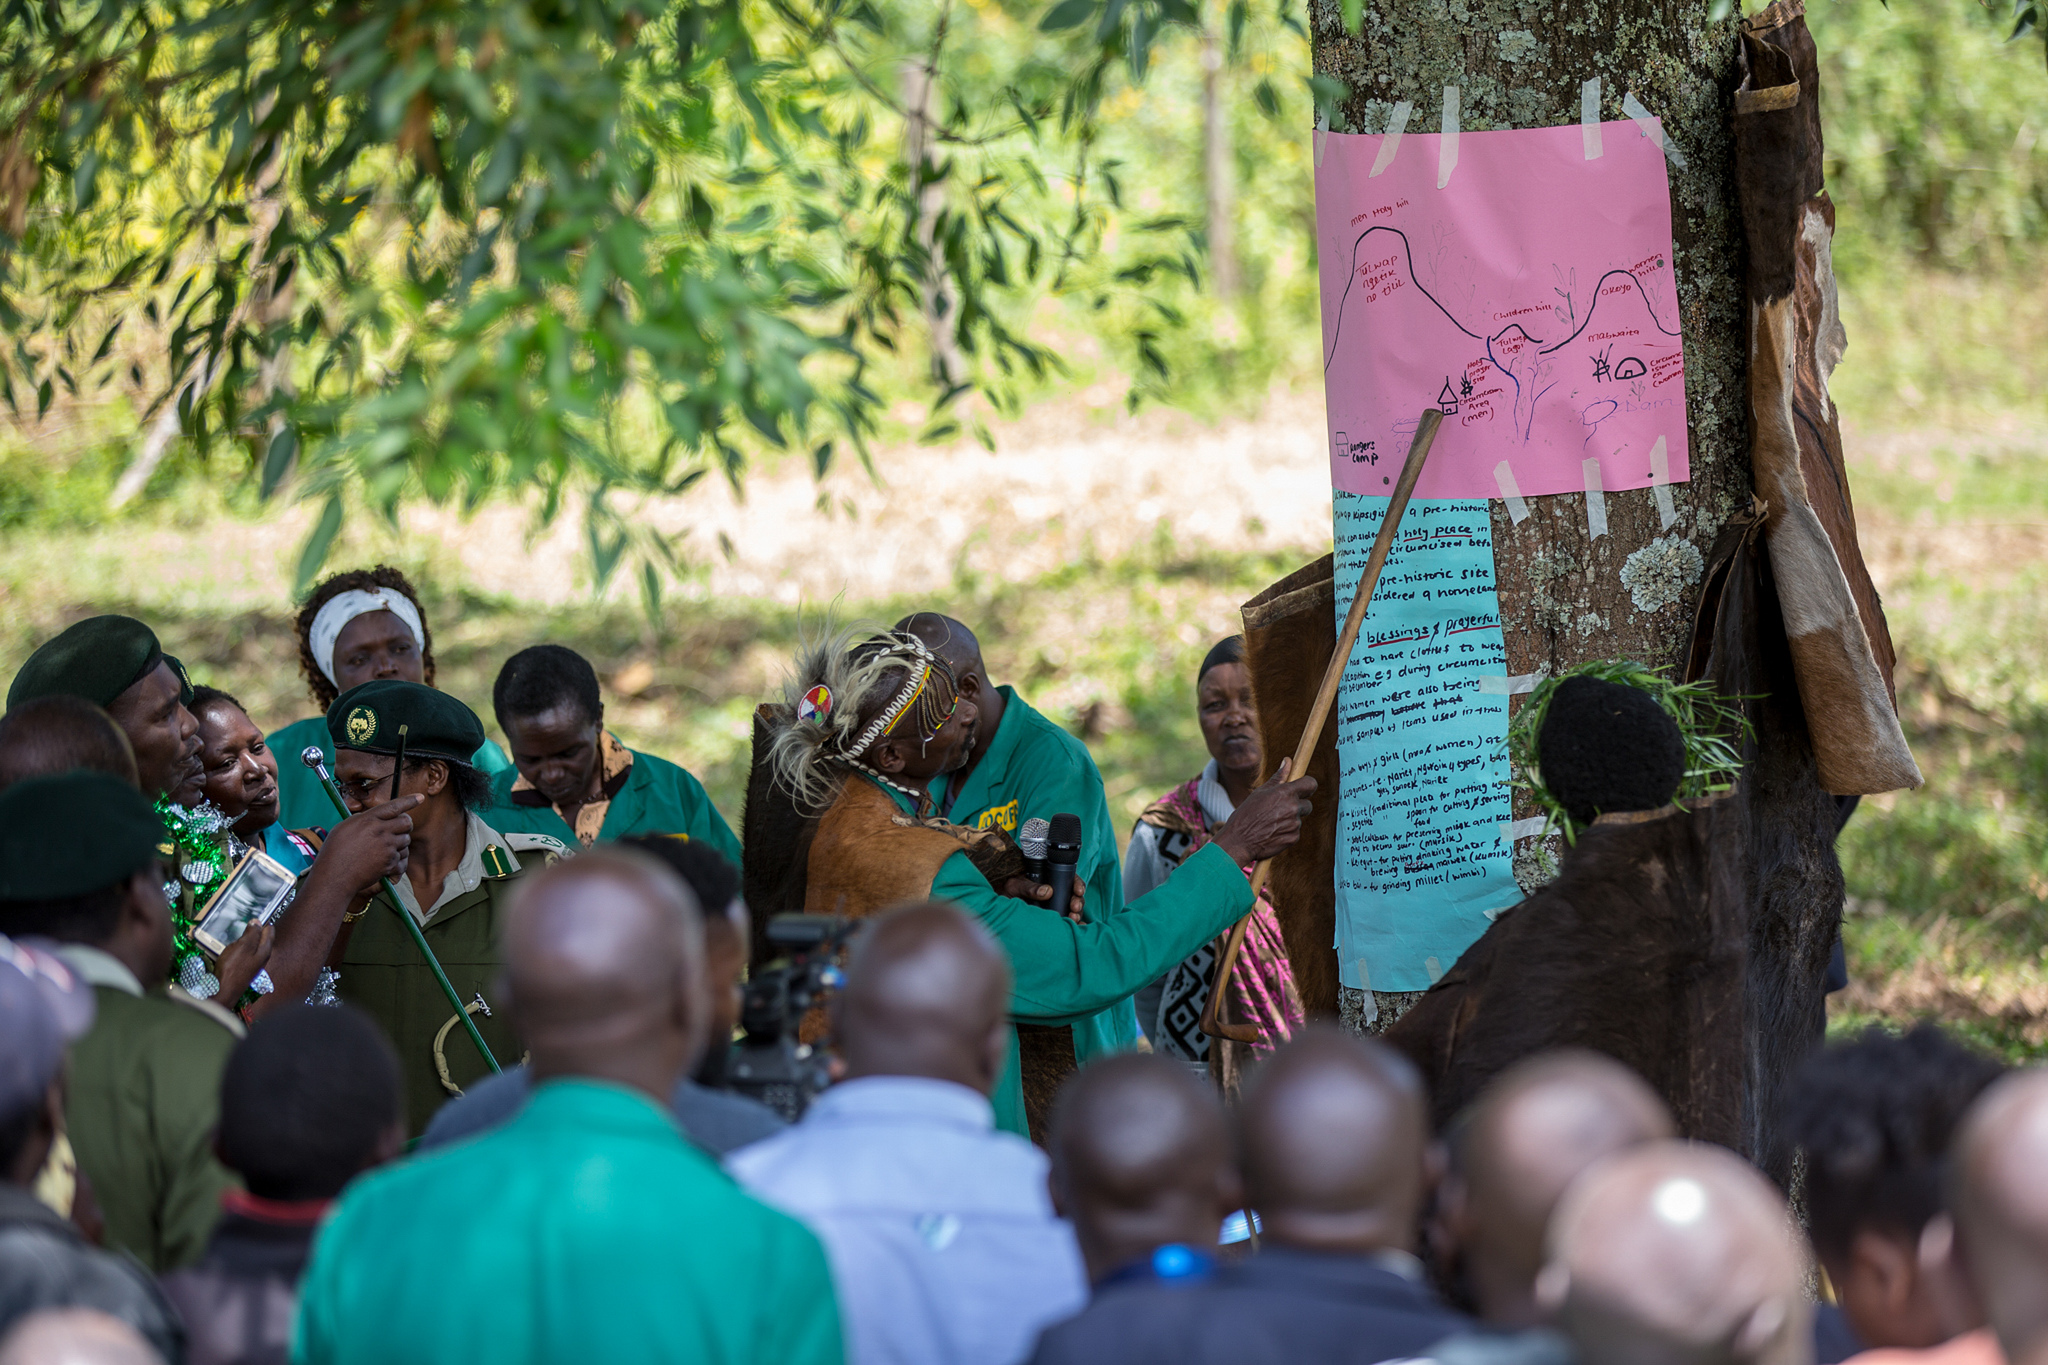 Community elder explaining the map of sacred hills in Londiani in Kenya's Rift Valley, on a tree to the community